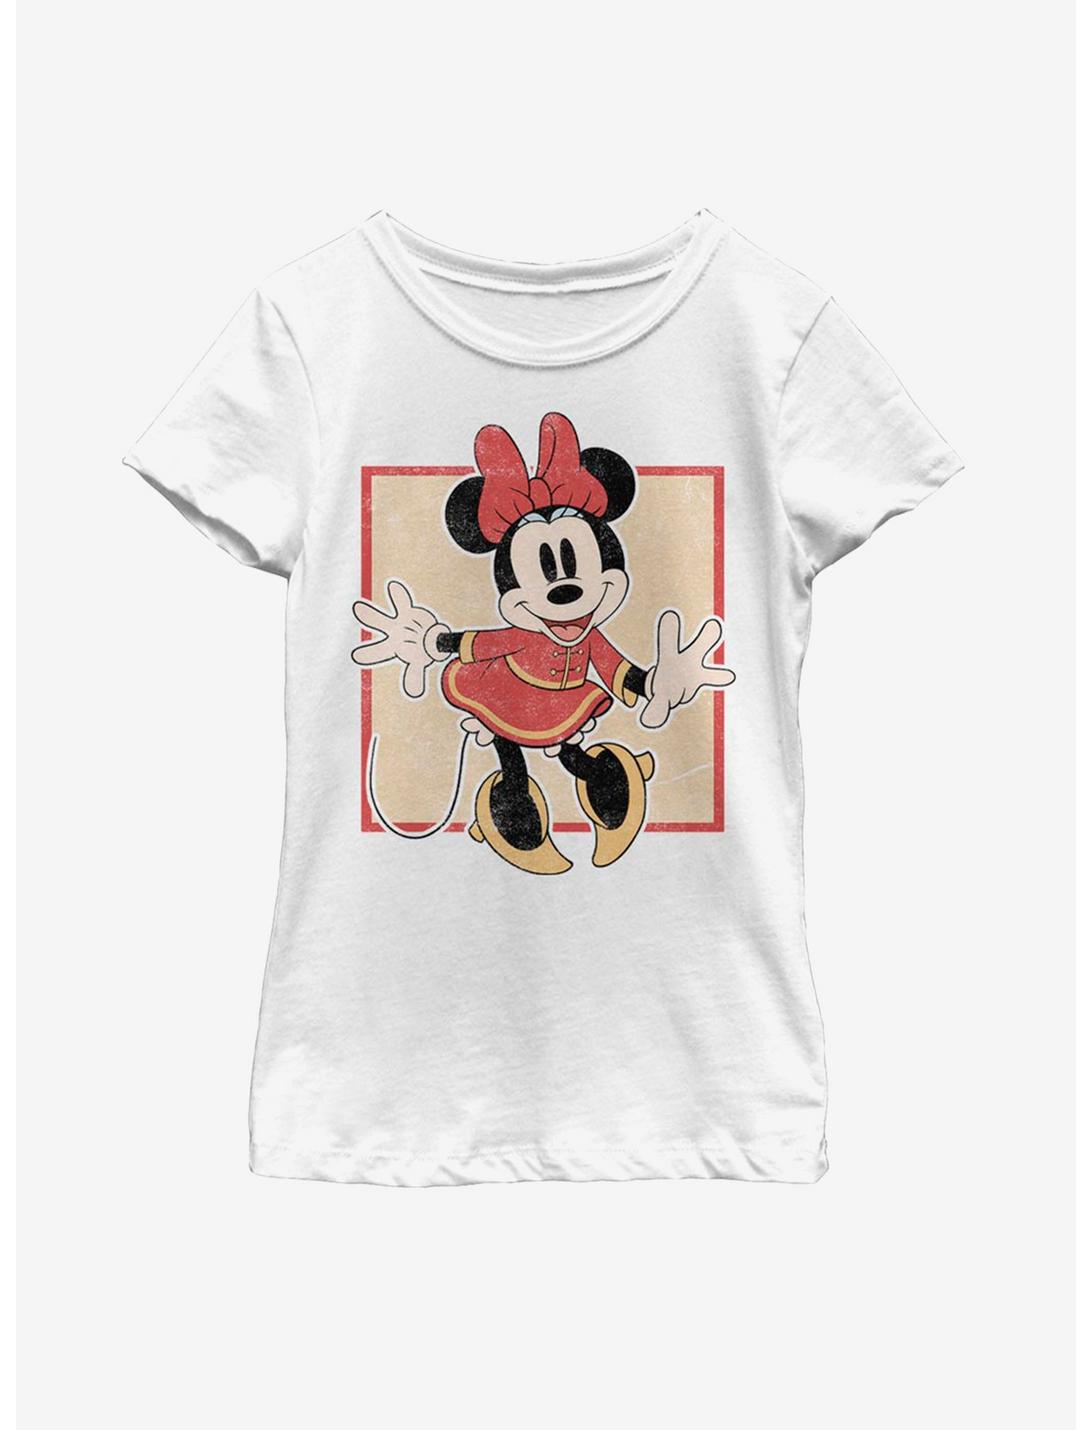 Disney Mickey Mouse Chinese Minnie Youth Girls T-Shirt, WHITE, hi-res